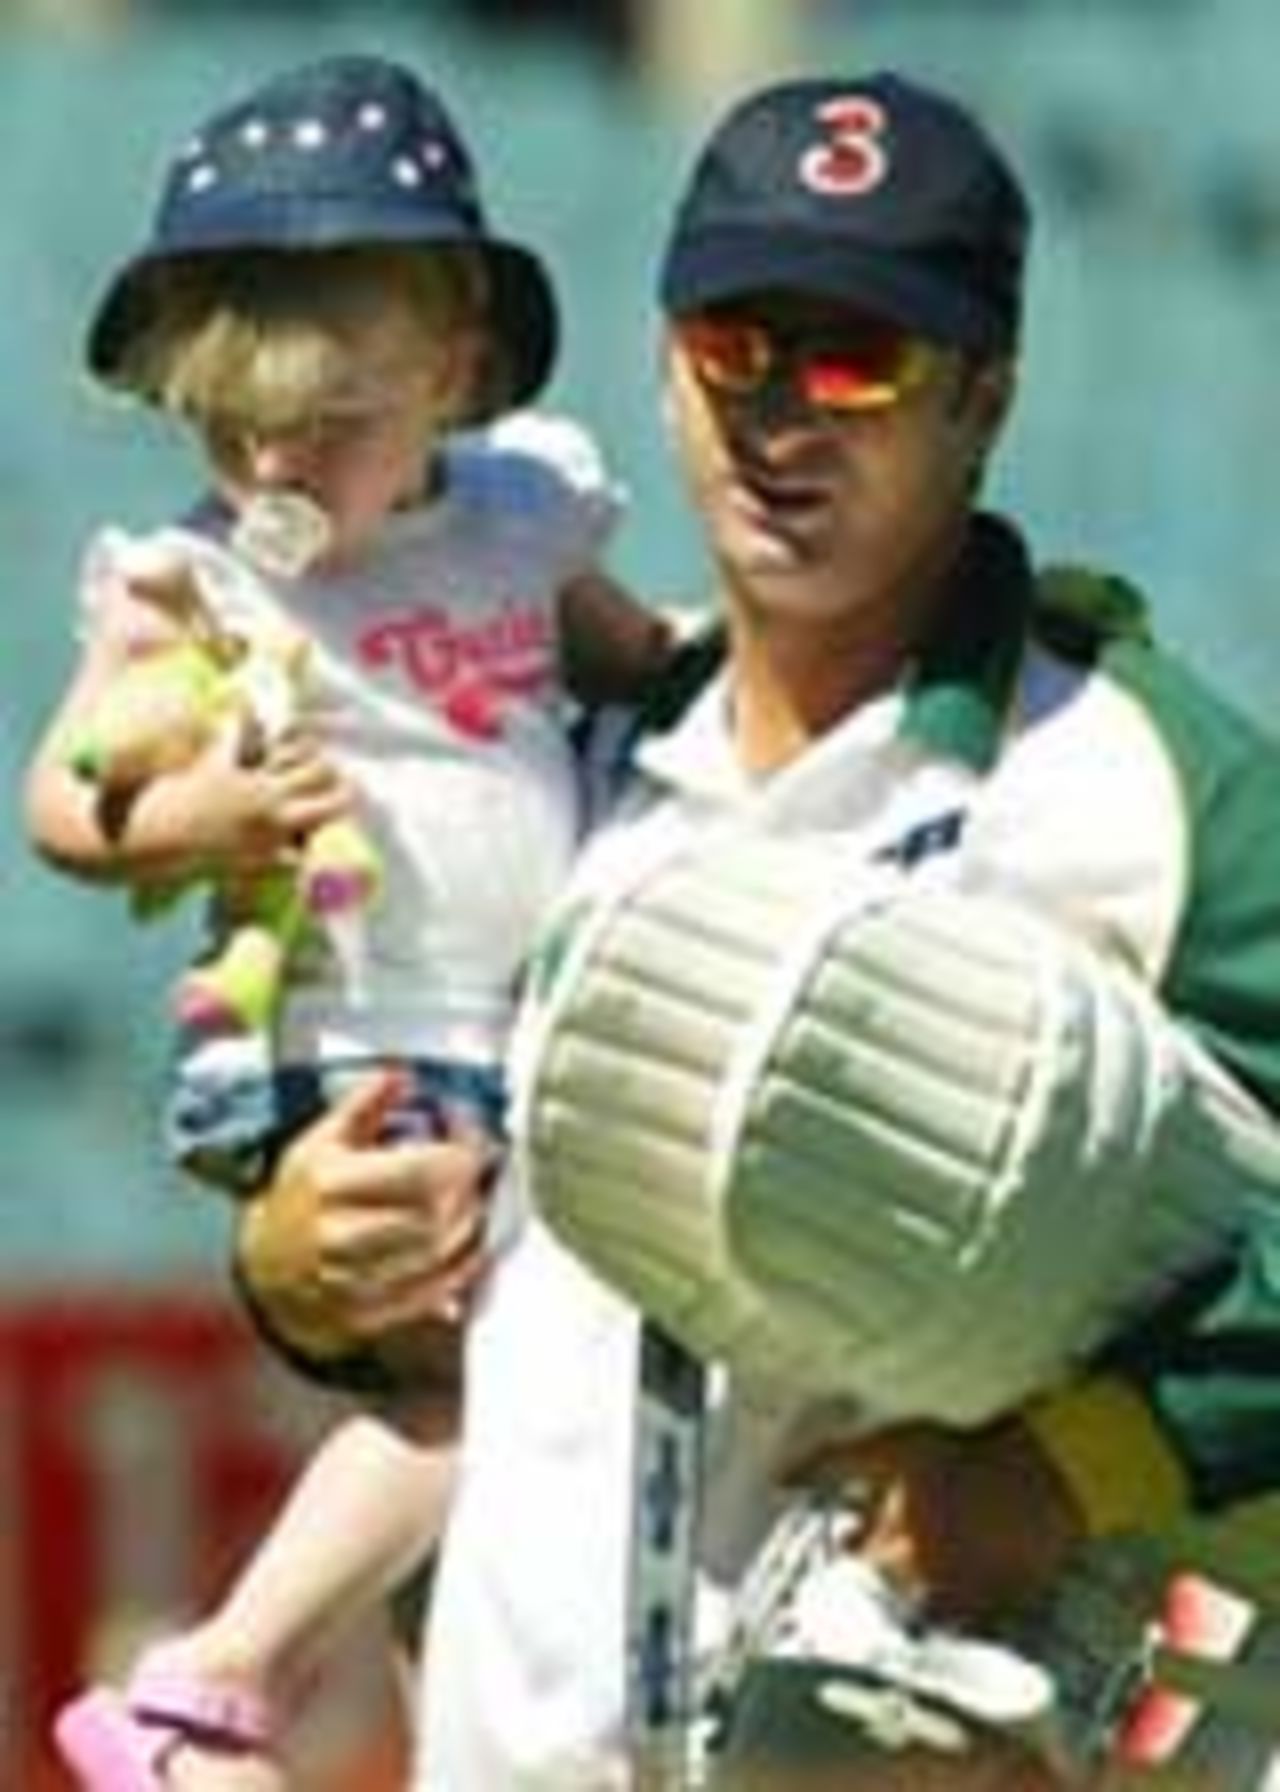 Steve Waugh with Lily Waugh, Melbourne, December 25, 2003